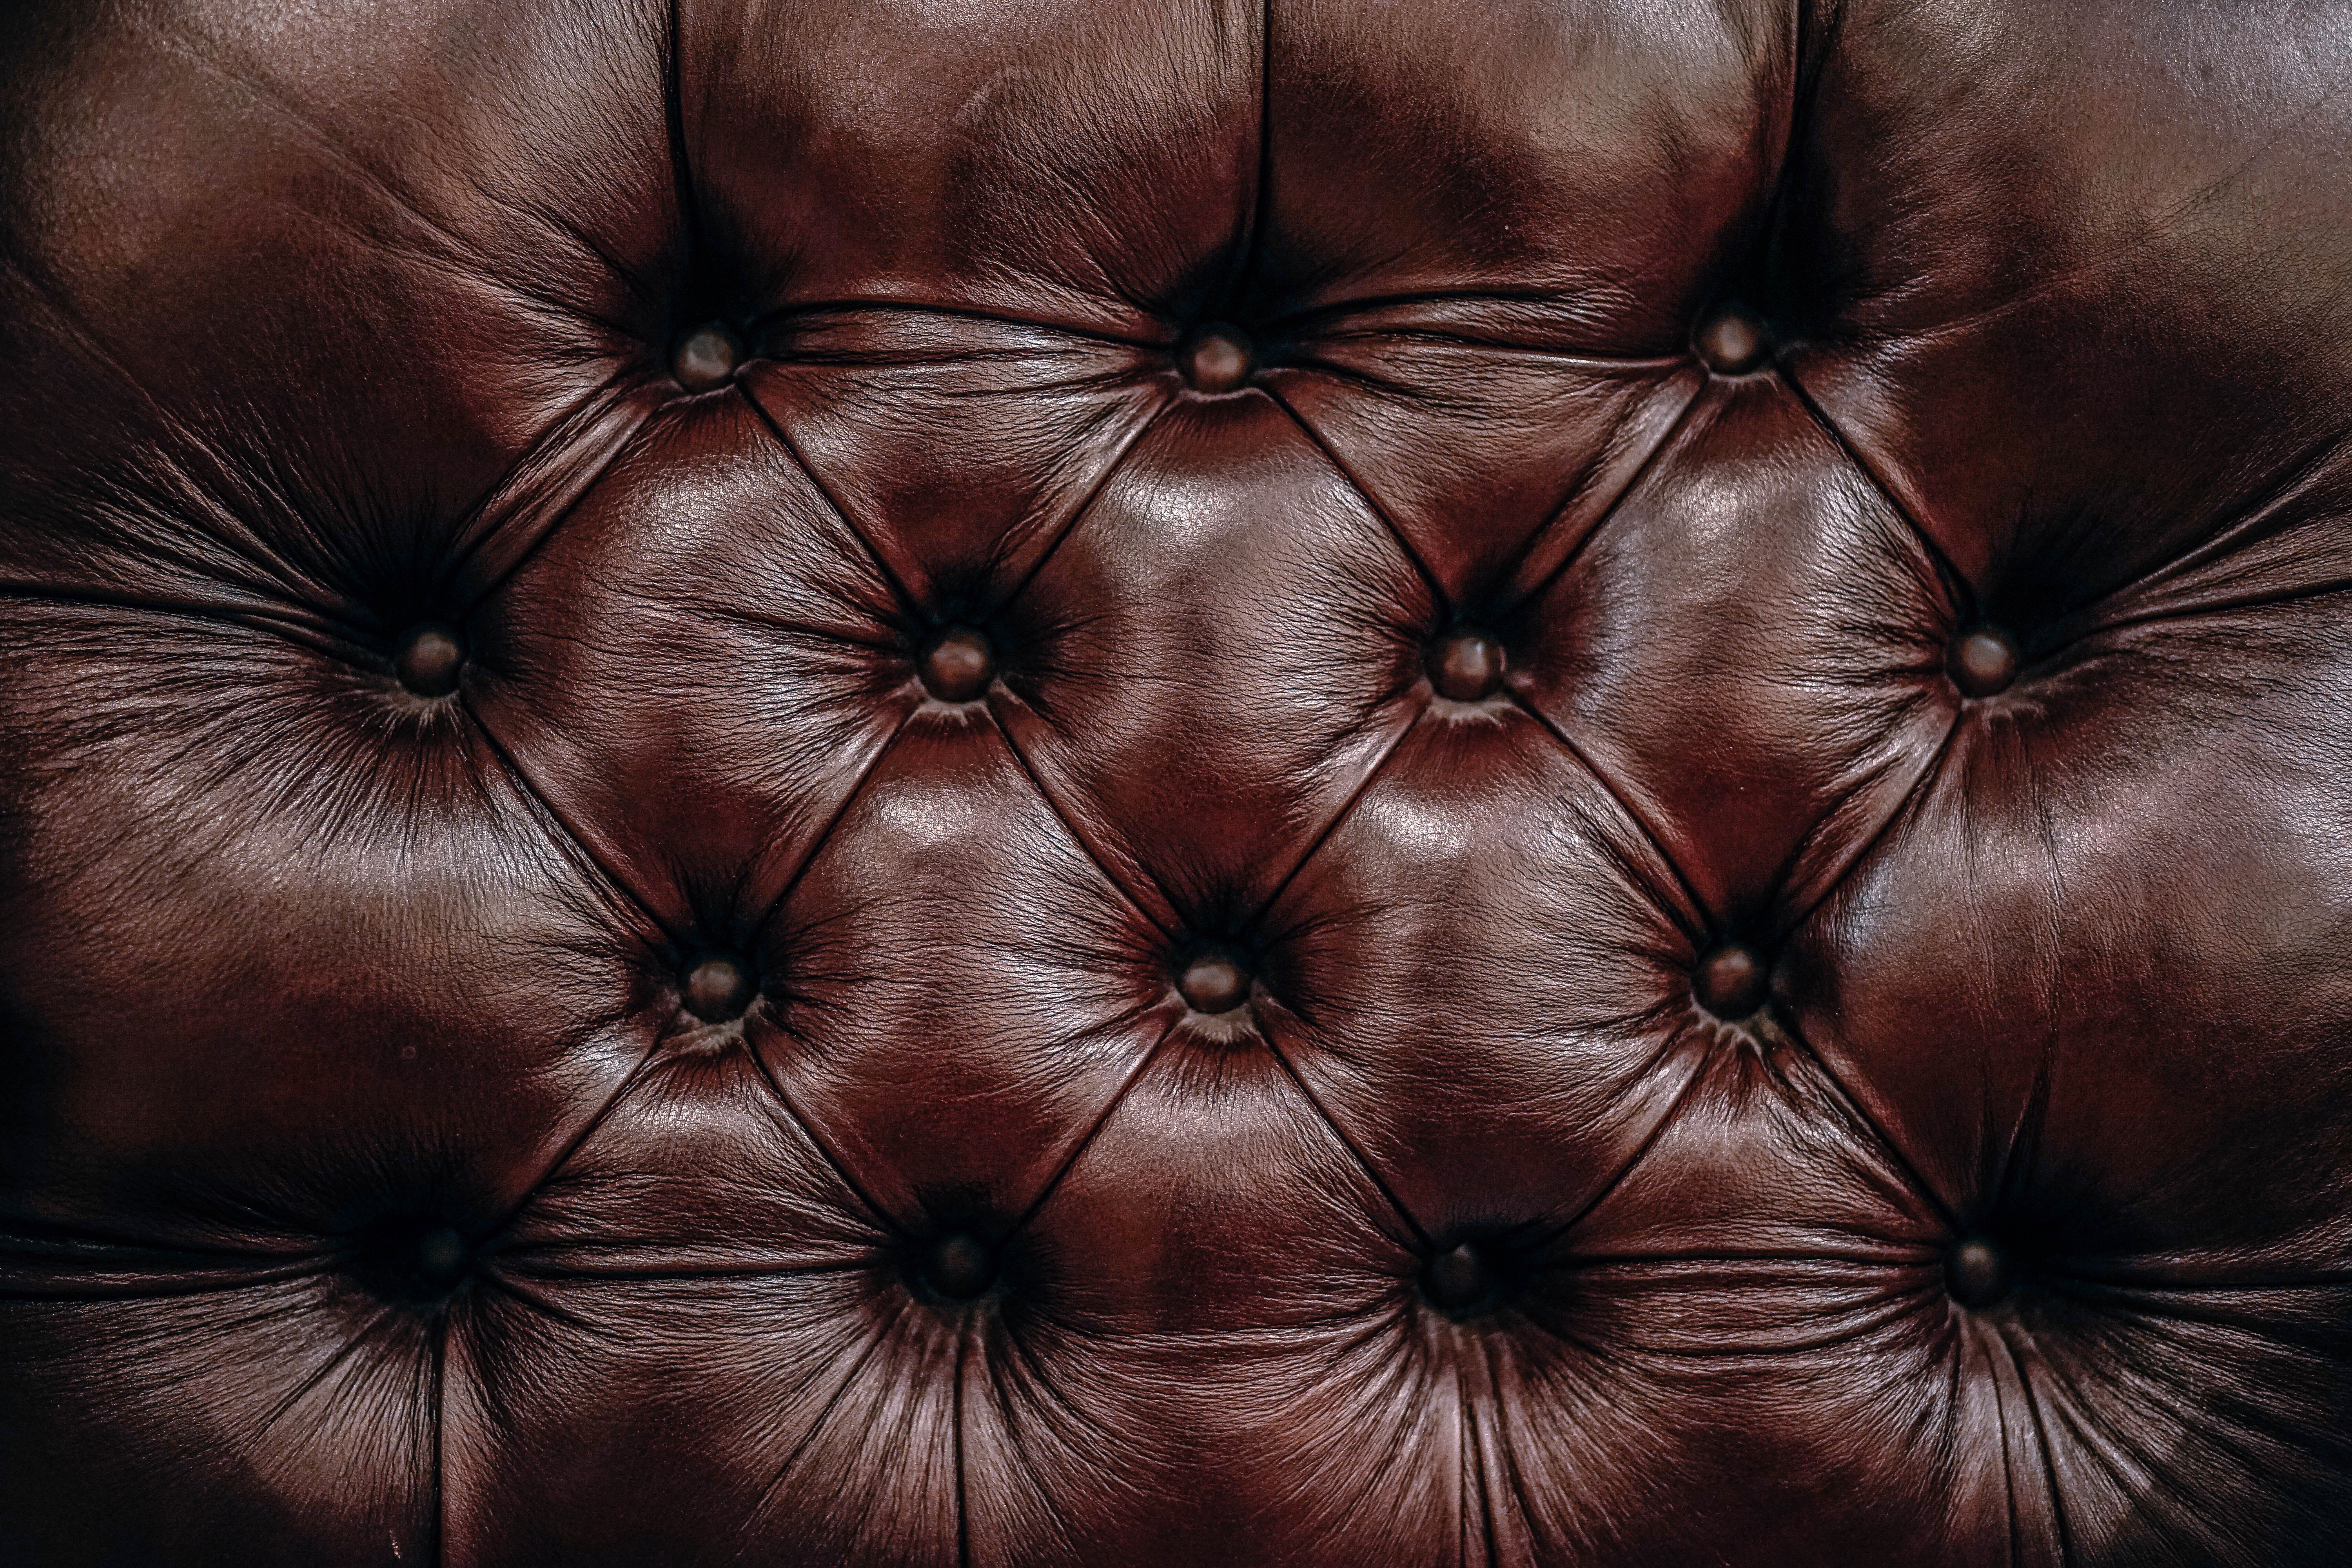 surface, skin, textures, texture, leather Image for desktop